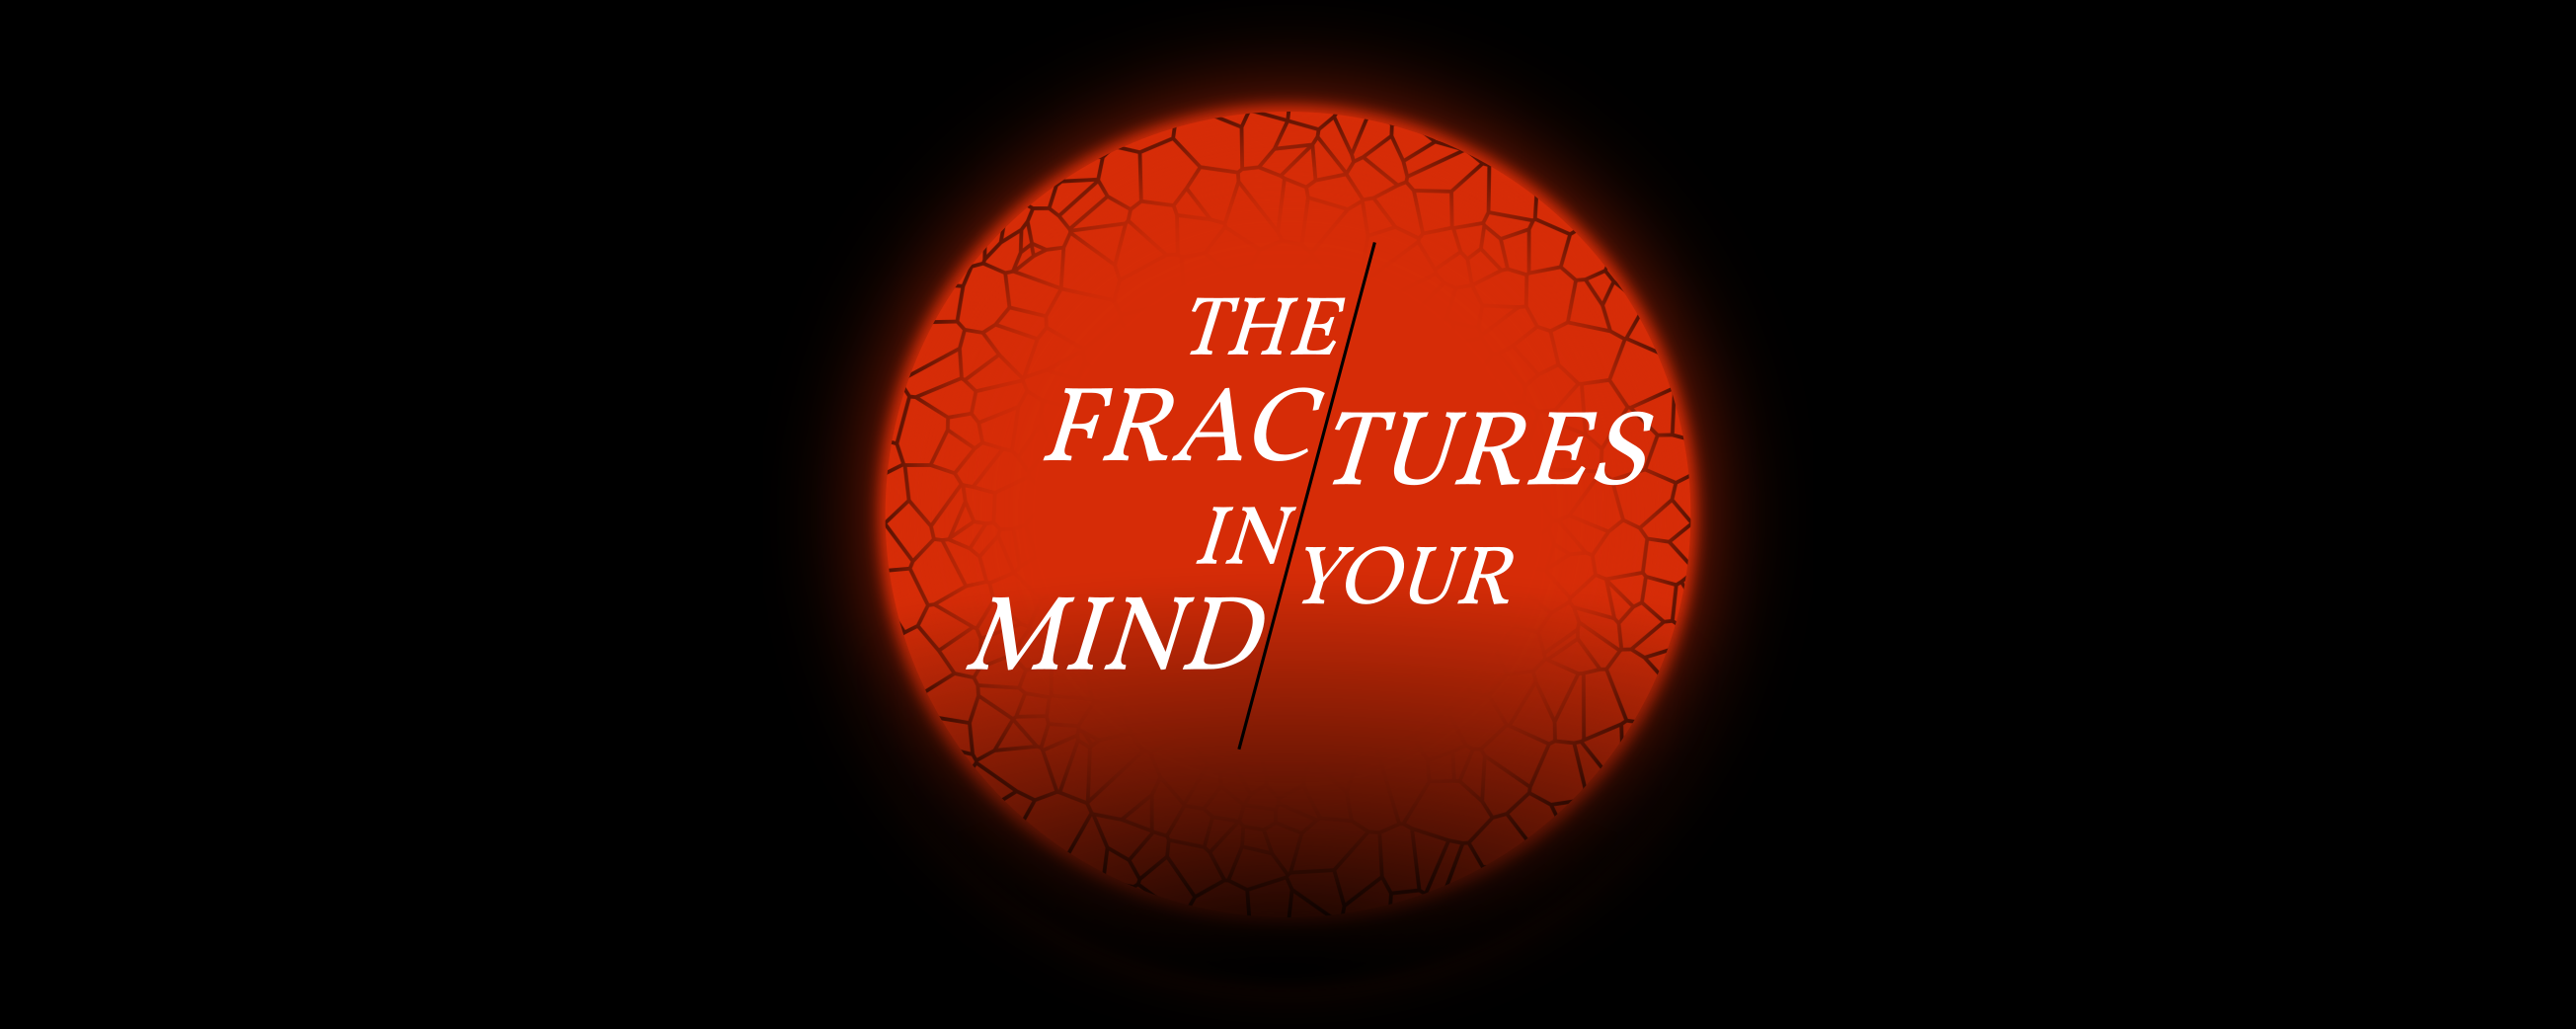 The Fractures in Your Mind